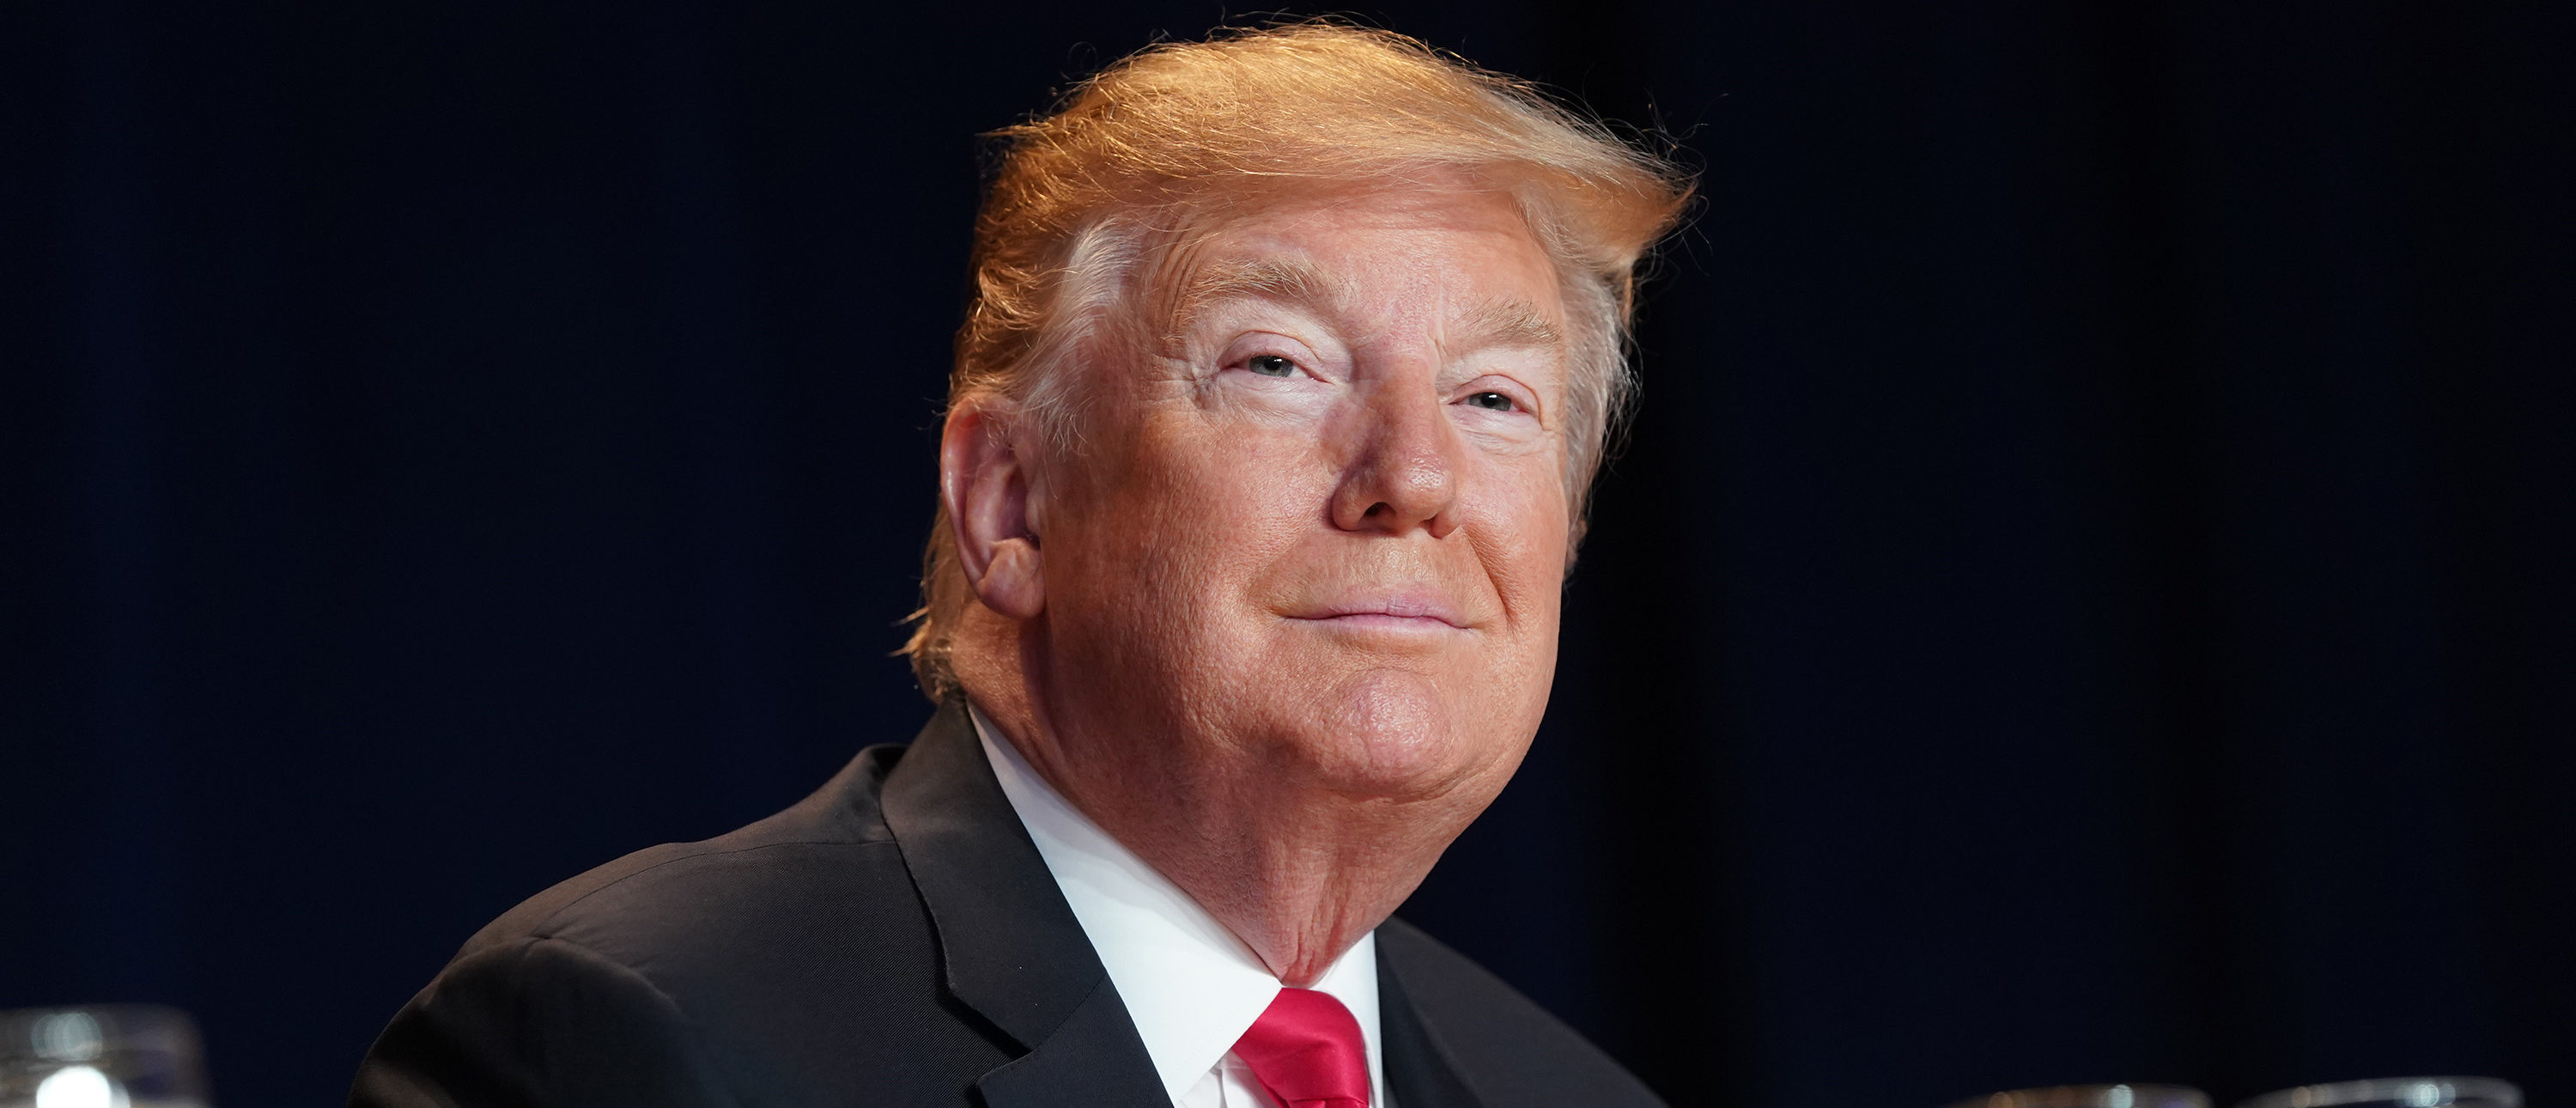 WASHINGTON, DC - FEBRUARY 7: (AFP OUT) U.S President Donald Trump attends the 2019 National Prayer Breakfast on February 7, 2019 in Washington, DC. (Photo by Chris Kleponis - Pool/Getty Images)